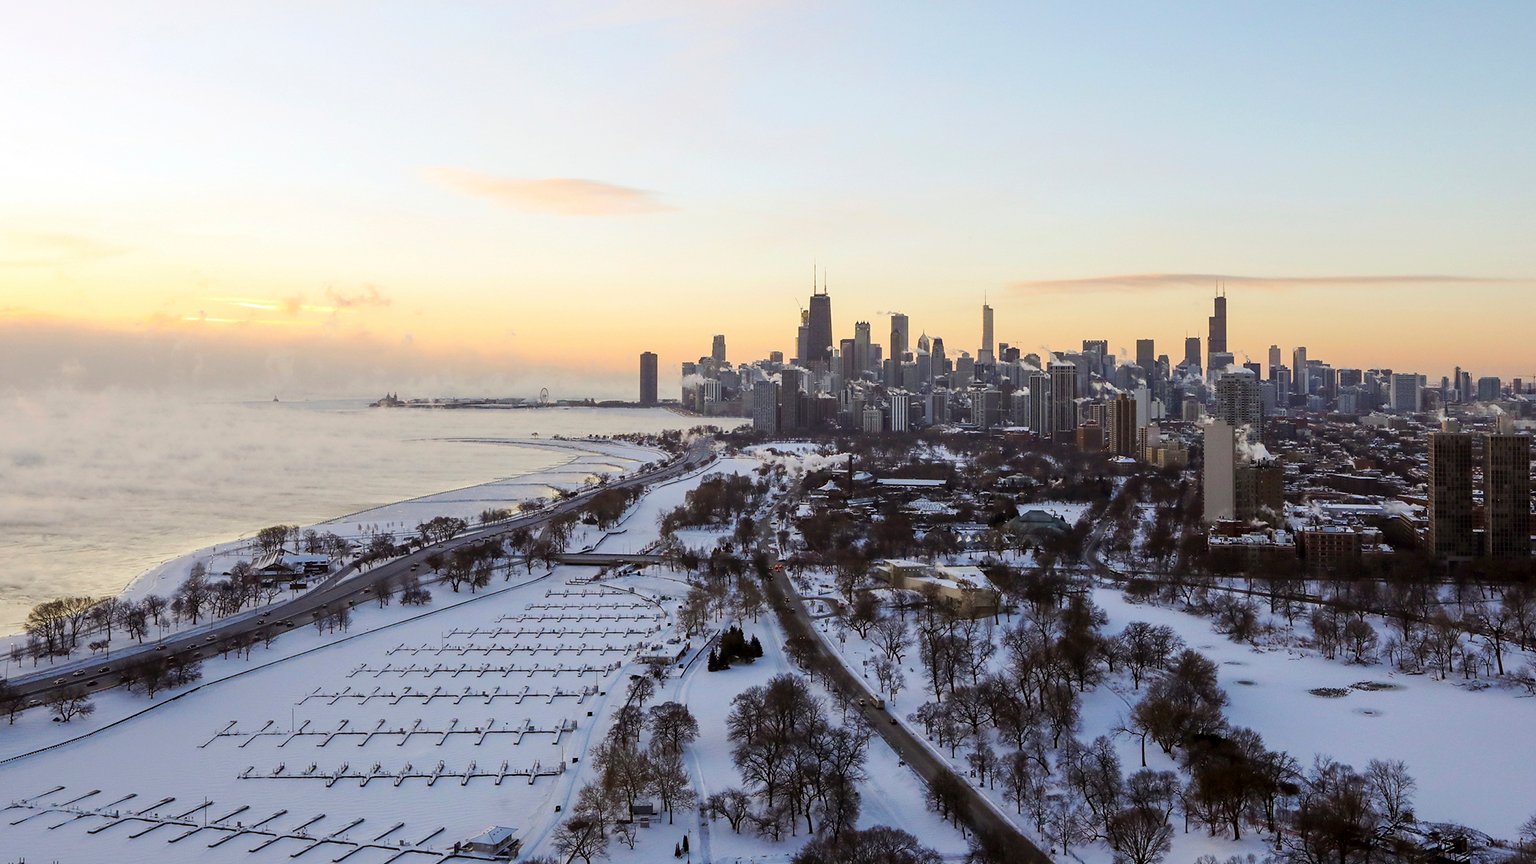 Chicago's lakefront is covered with ice on Wednesday, Jan. 30, 2019. Temperatures are plummeting in Chicago as officials warn against venturing out into the dangerously cold weather. (AP Photo/Teresa Crawford)